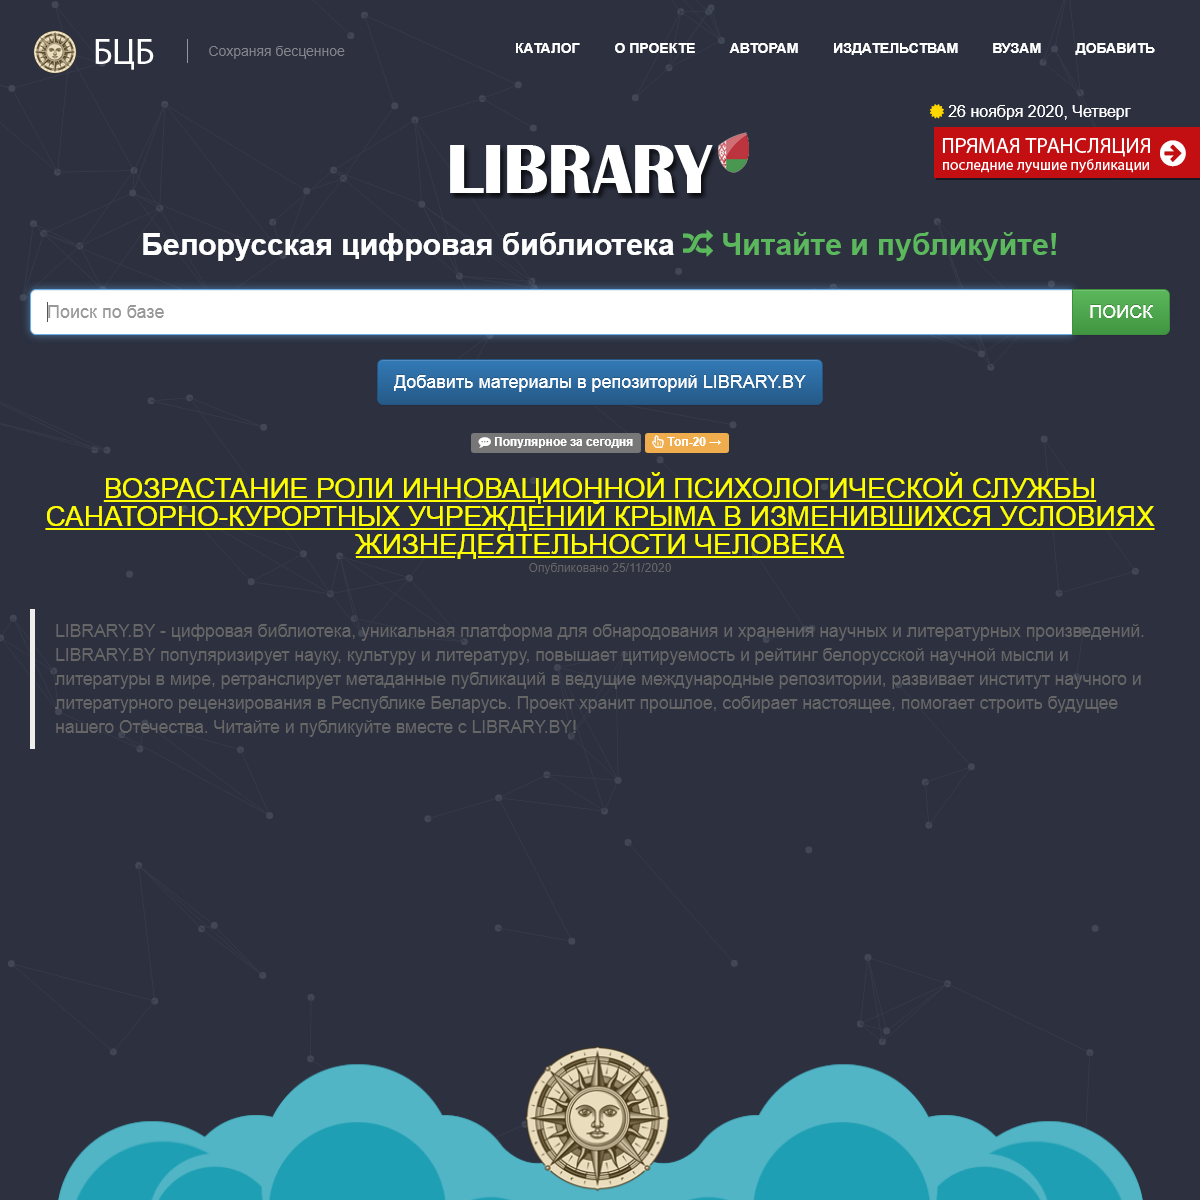 A complete backup of library.by